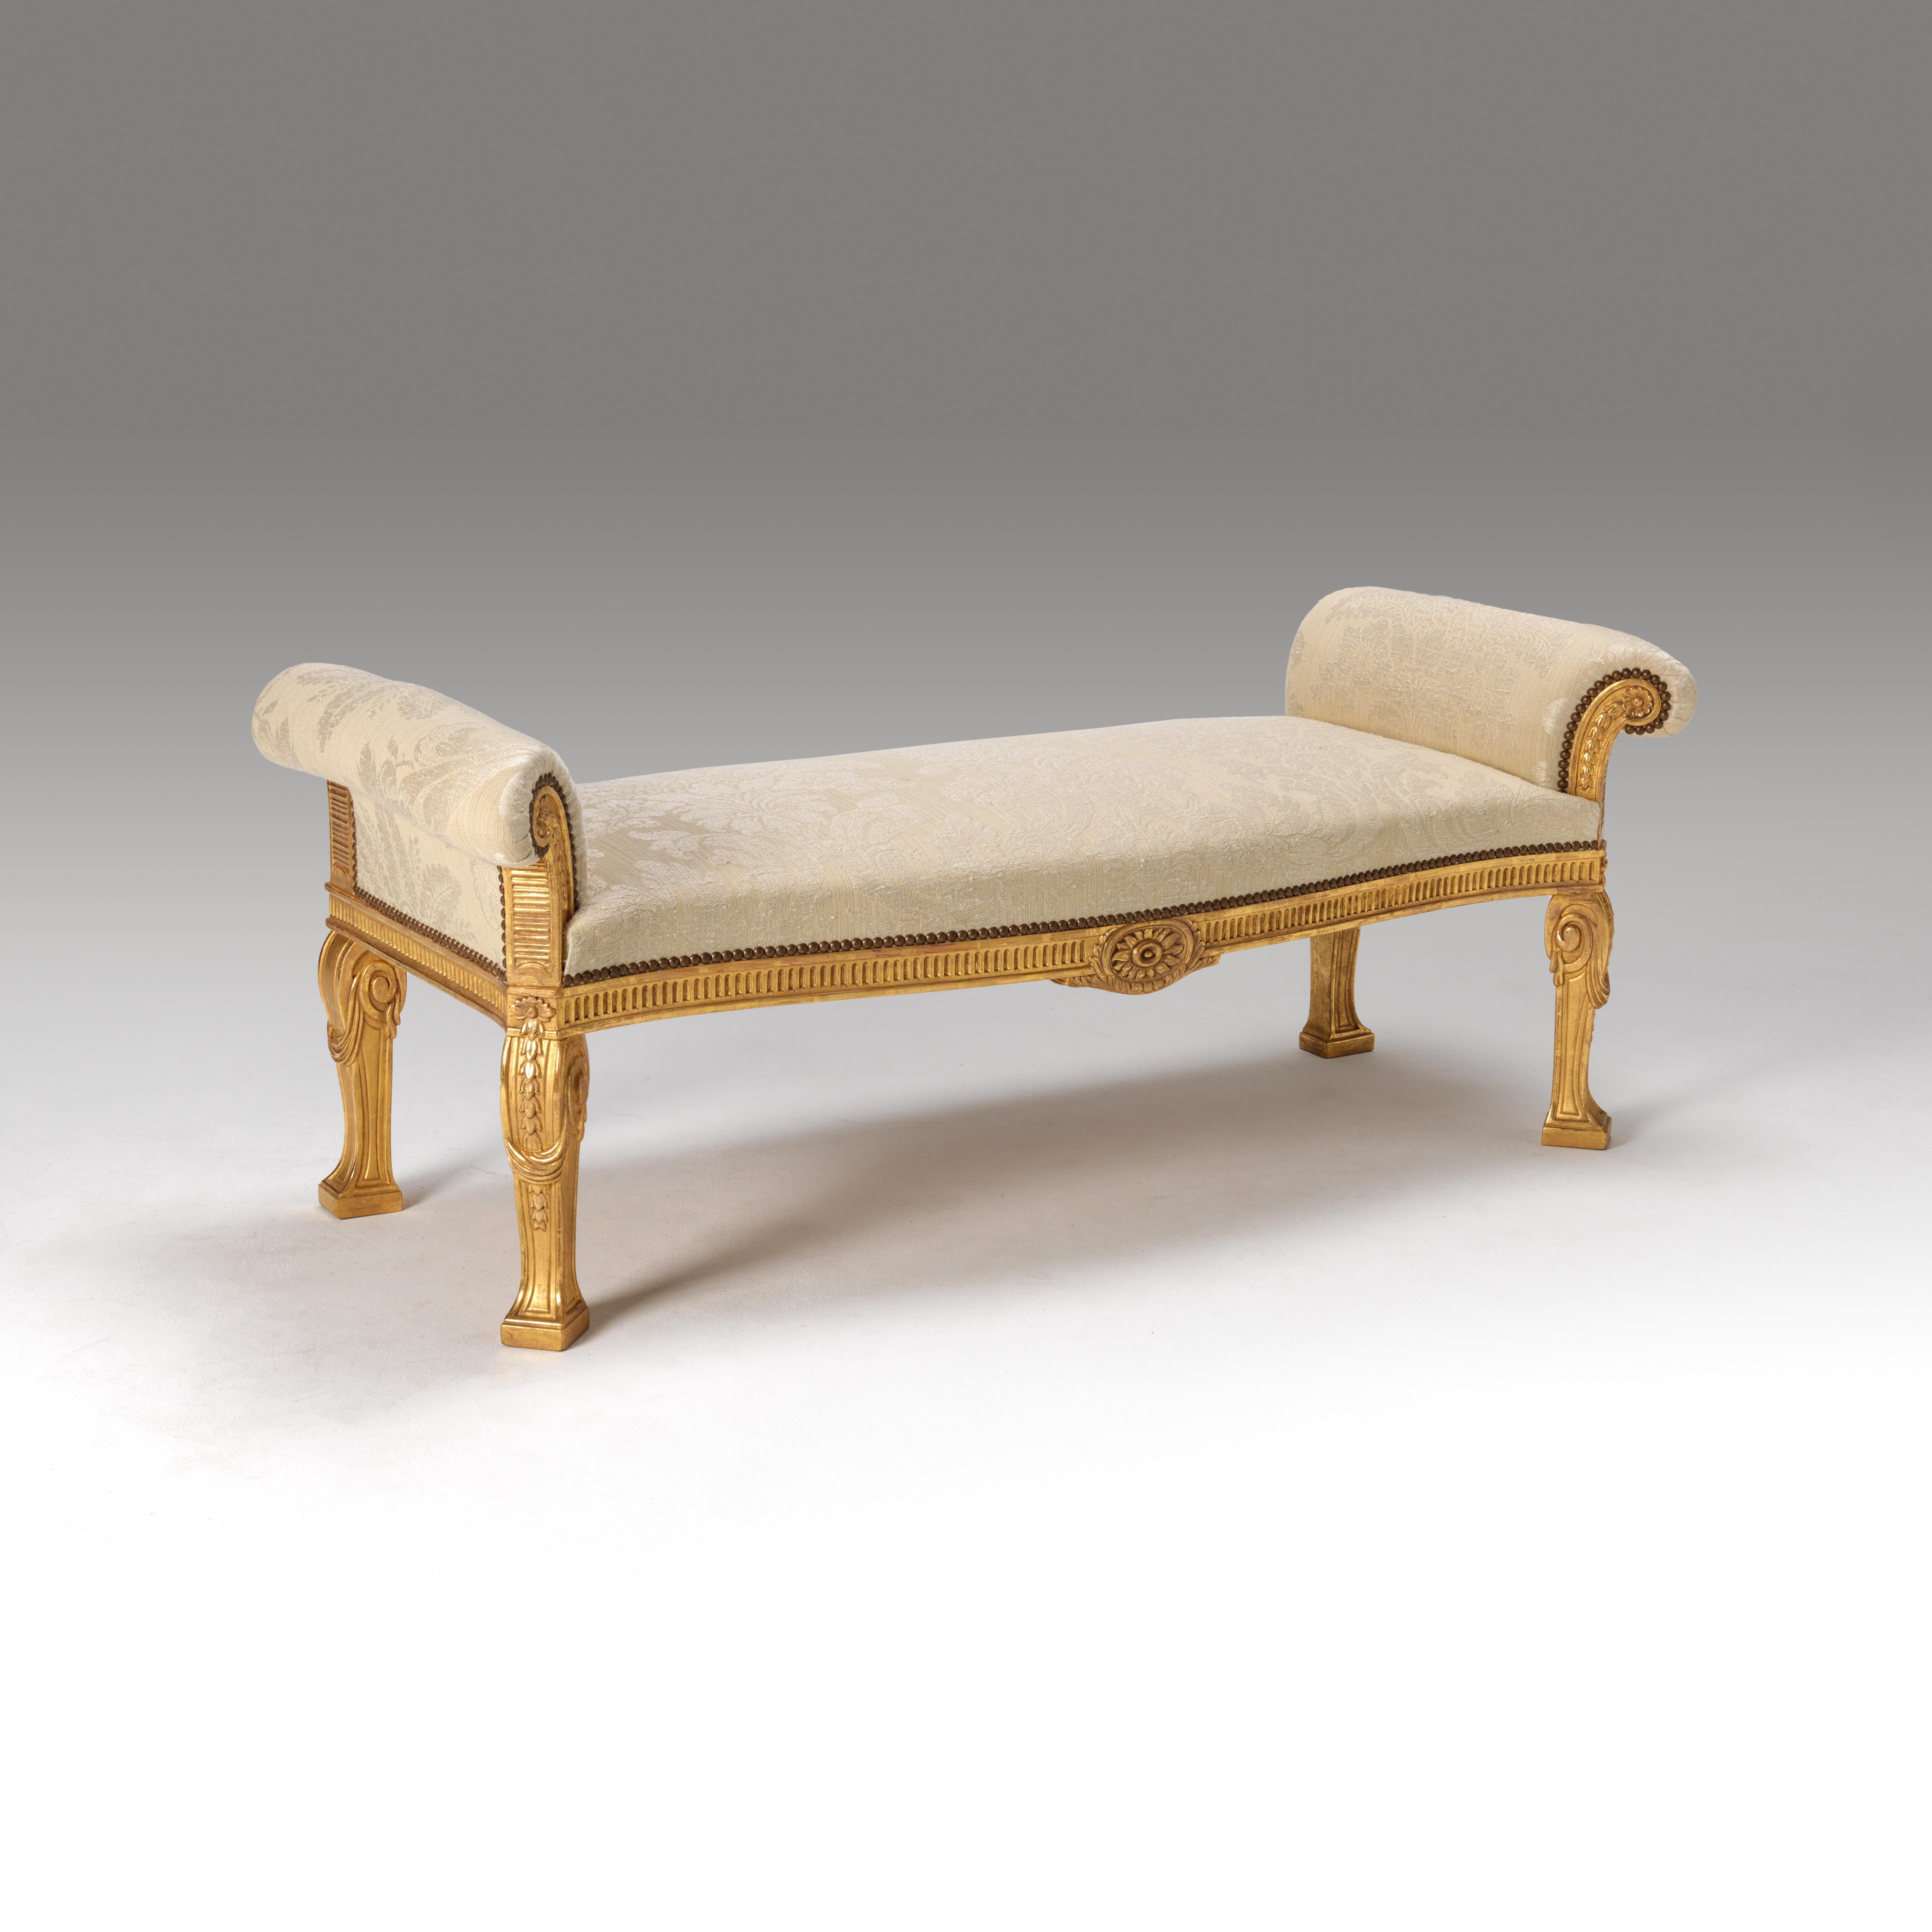 A fine carved giltwood window seat after a design by
Robert Adam. Upholstered in client’s own material.

Bespoke sizing, design adaptations and finishing available.

We are currently working to a 30-36 week lead time.